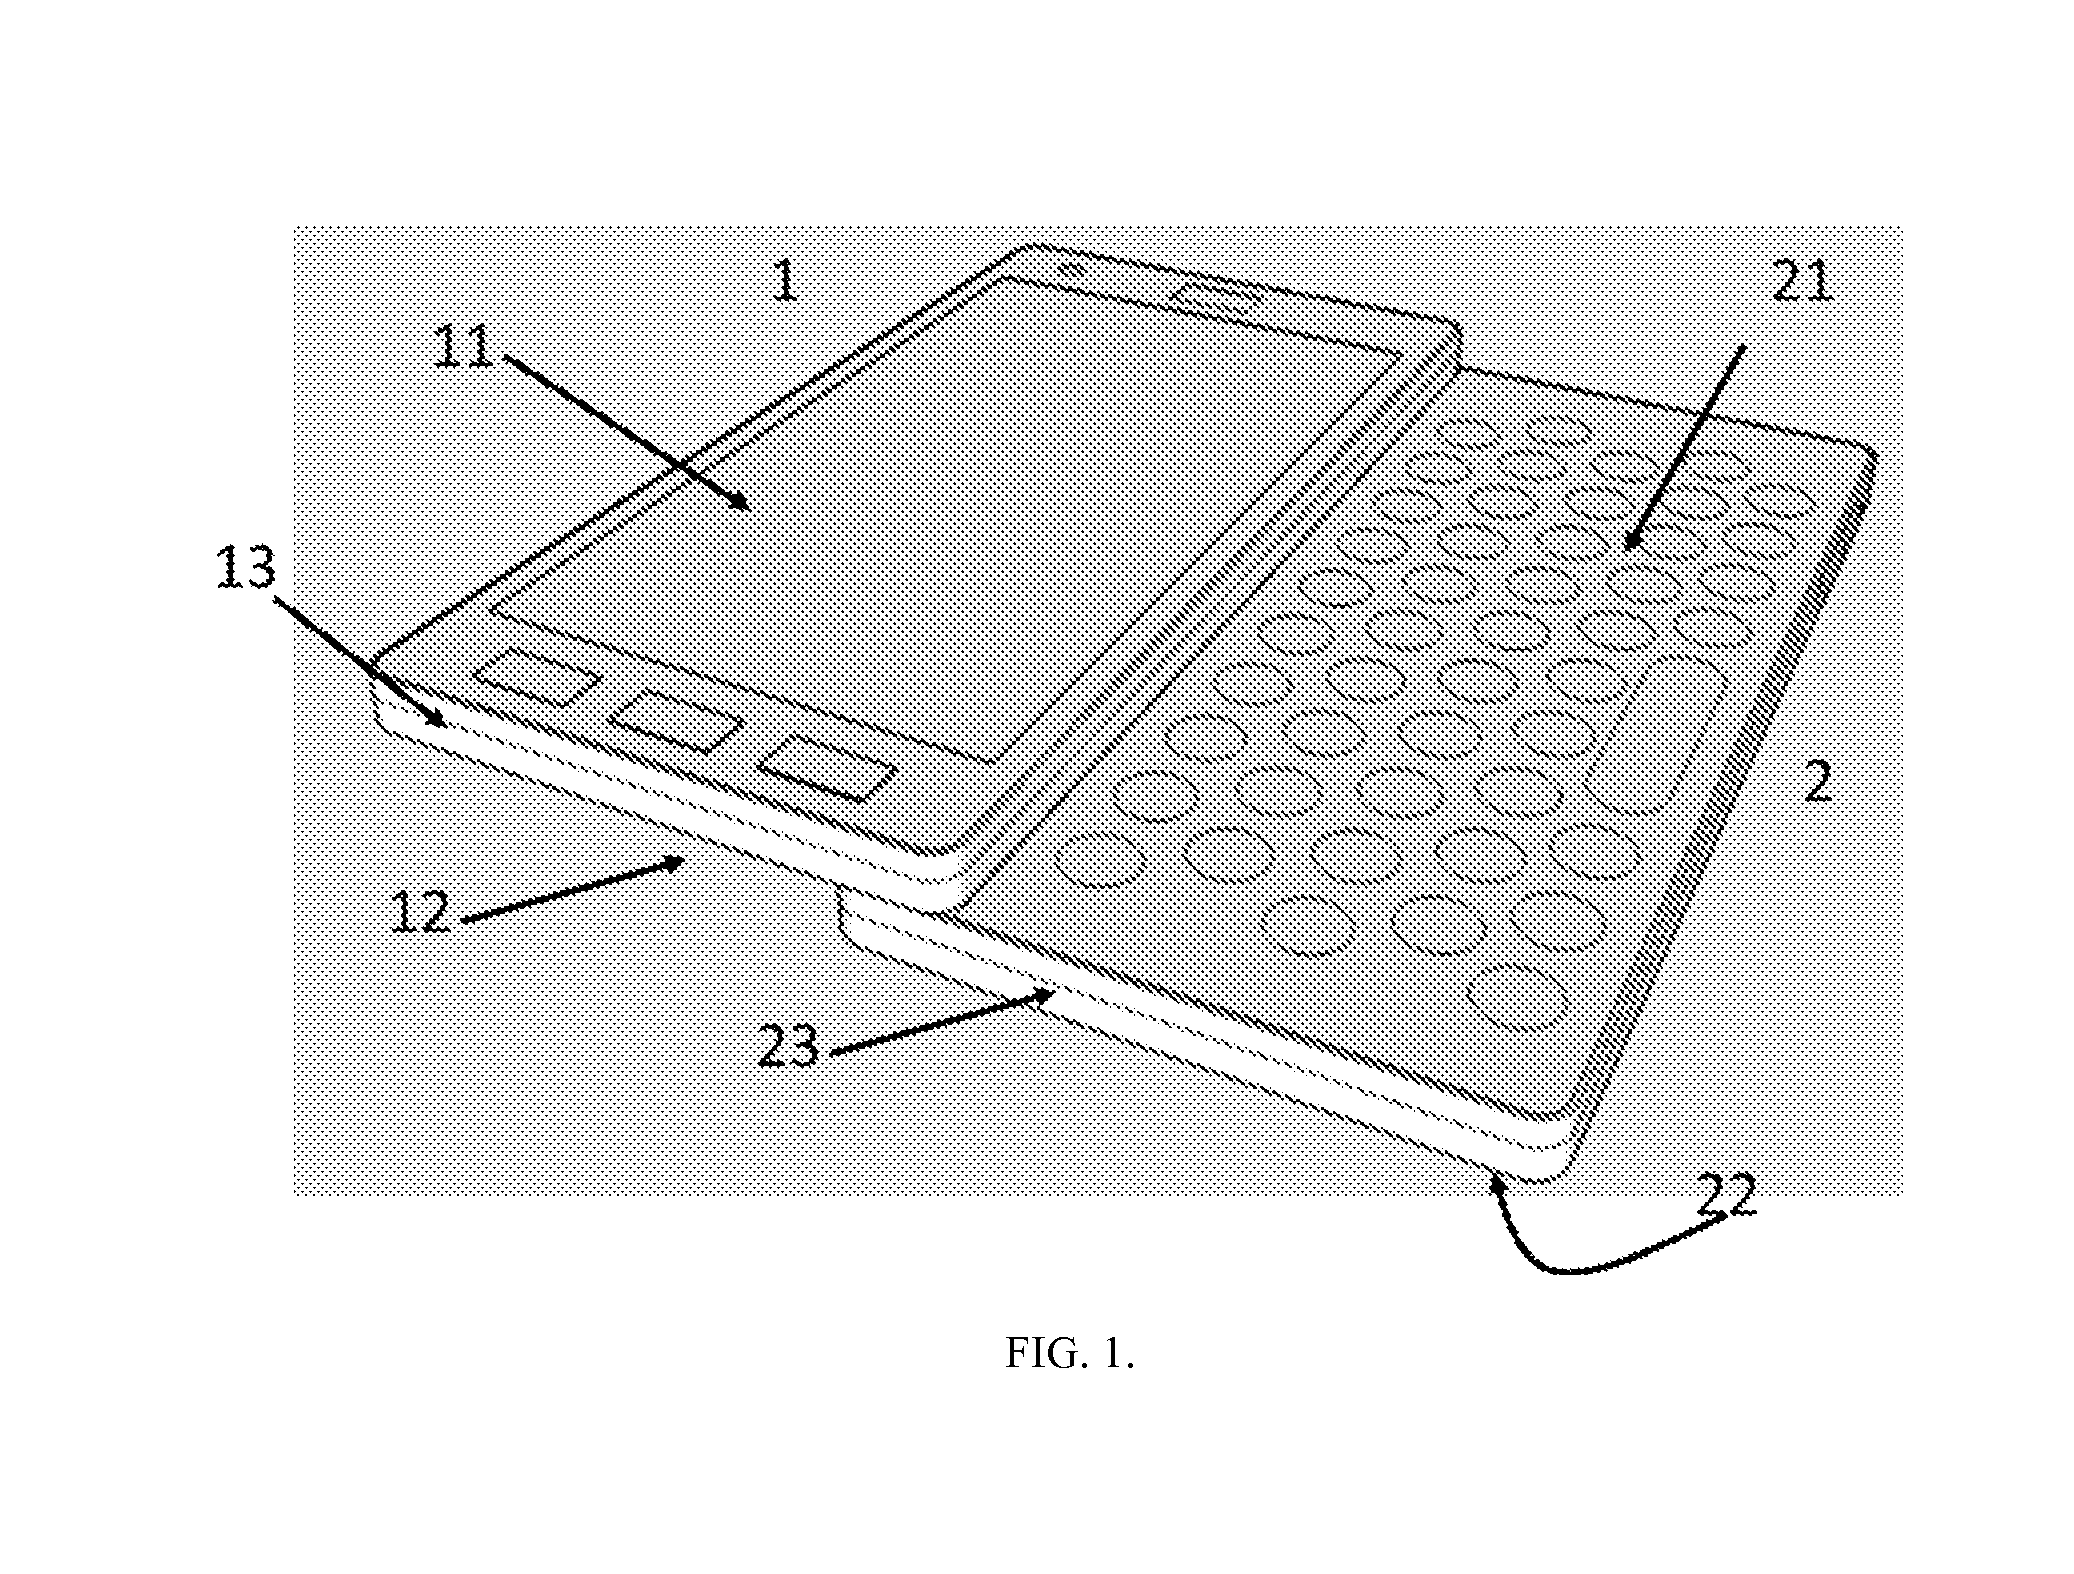 Configurable heat conducting path for portable electronic device